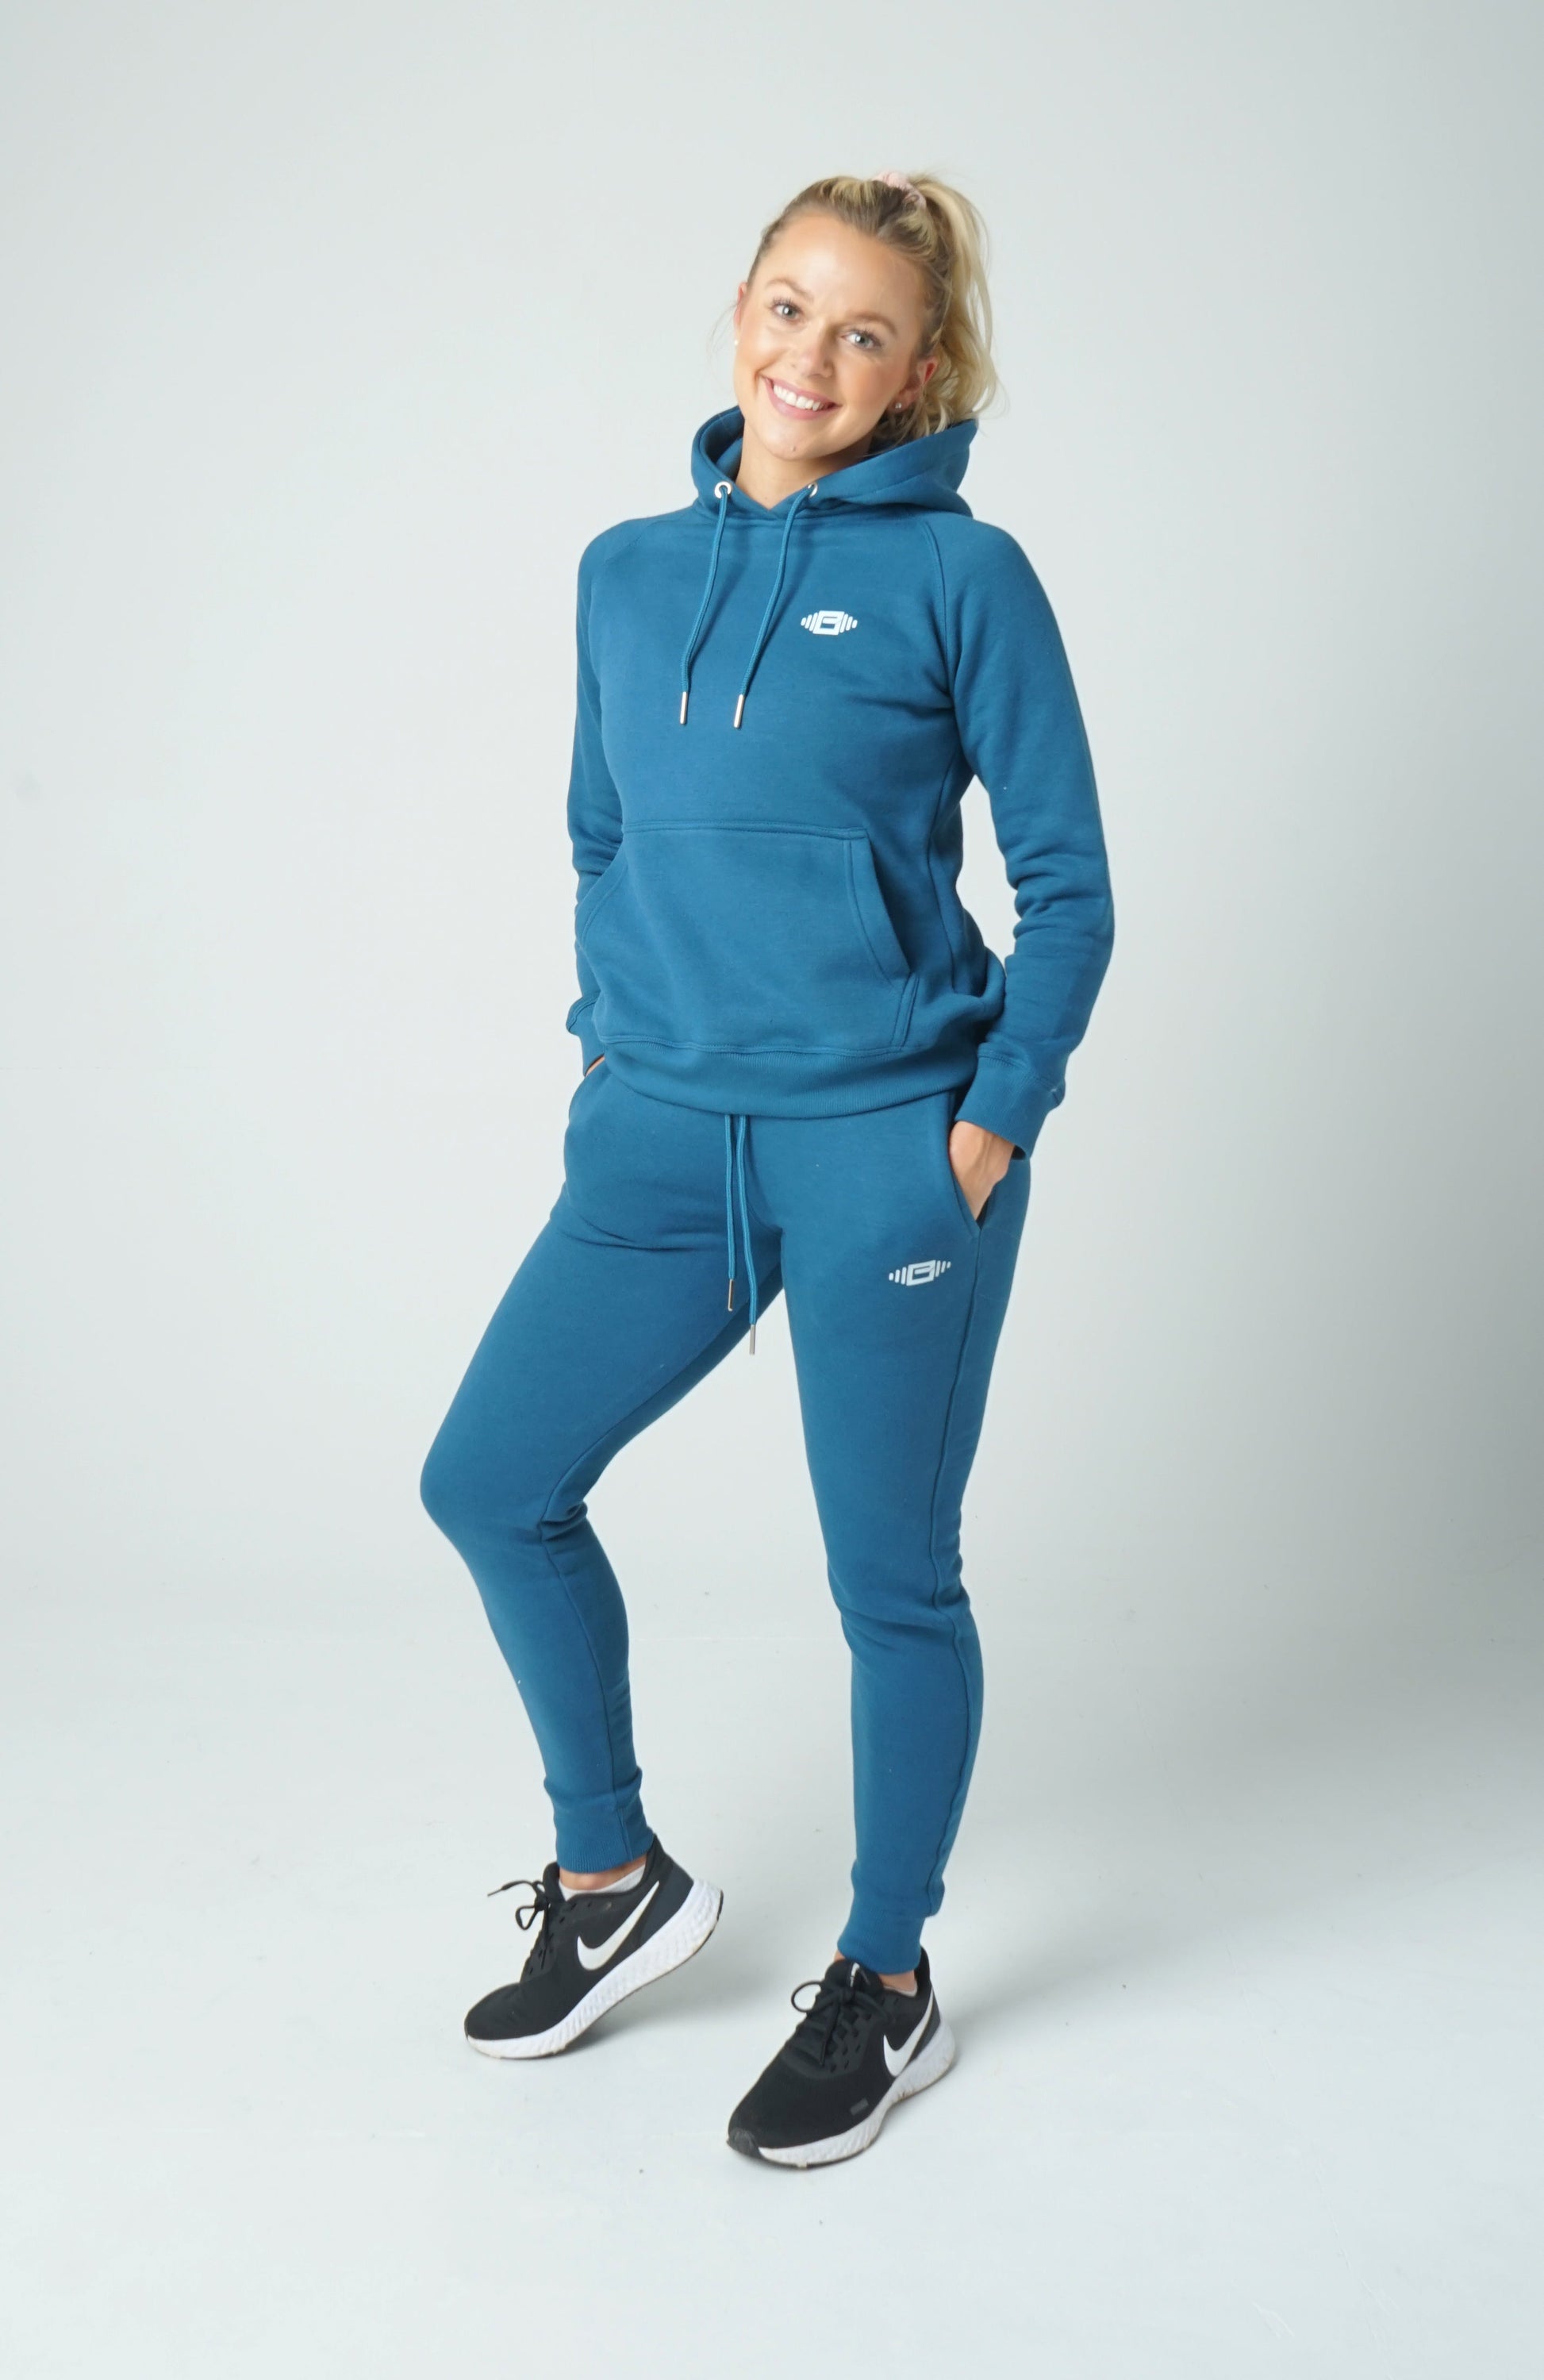 Women's Buzz Physique Essential Hoodie - Teal